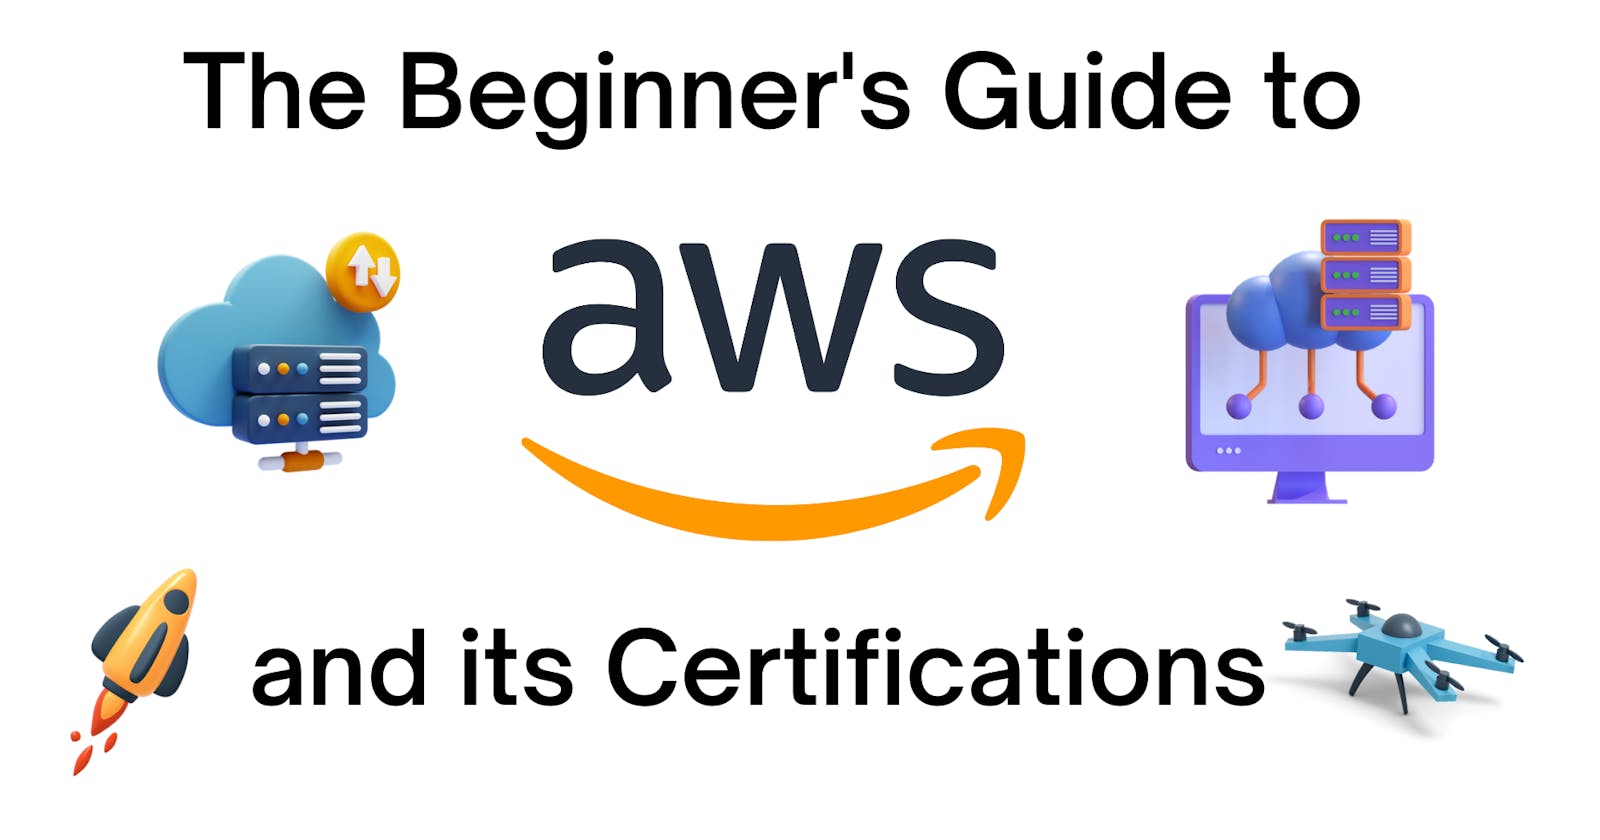 The Beginner's Guide to AWS and its Certifications